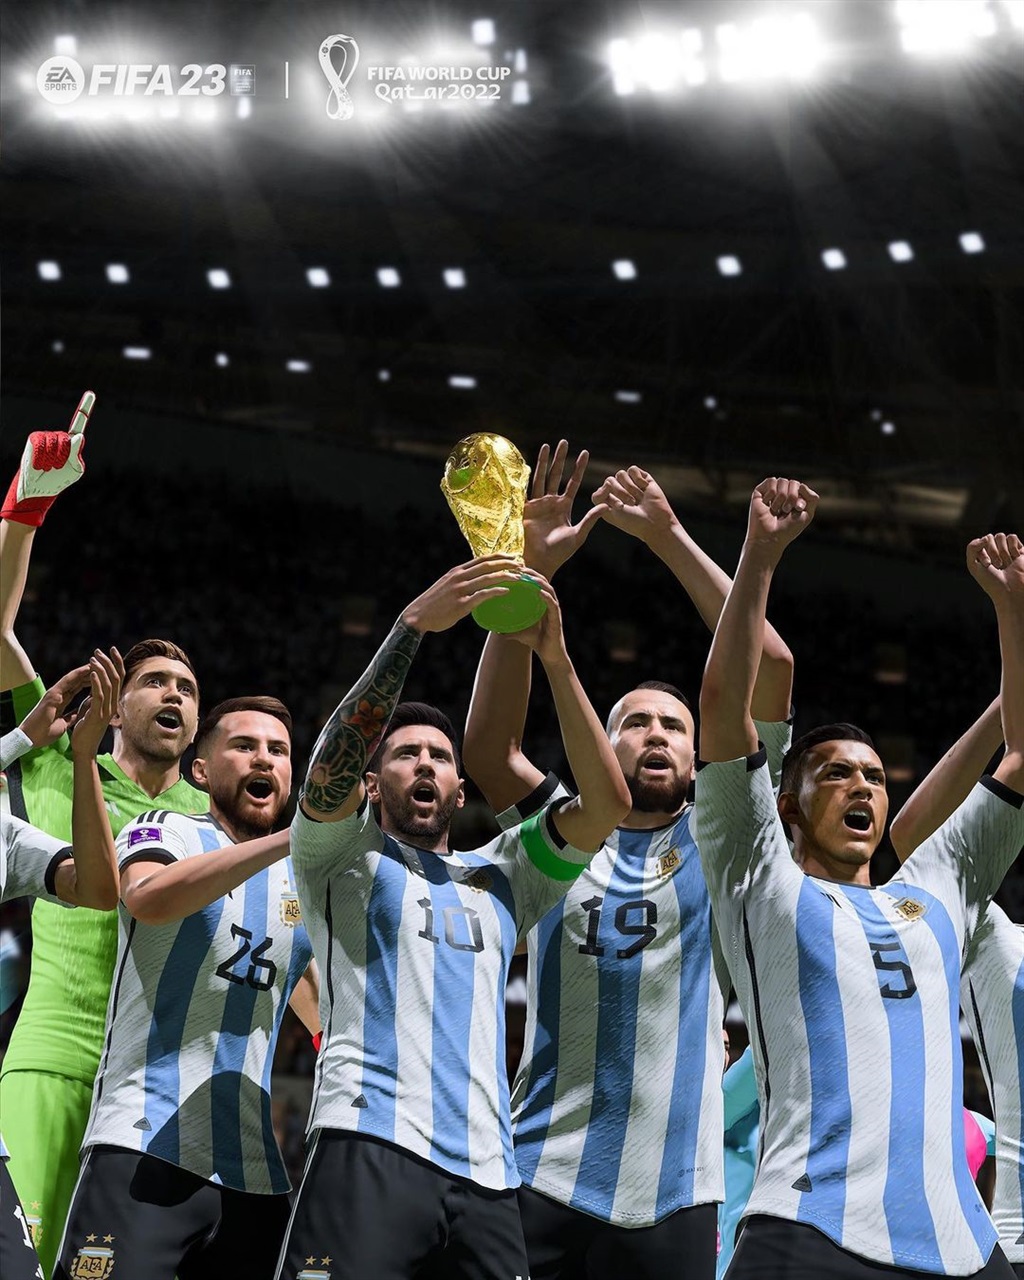 For the fourth time in a row, EA Sports correctly predicted the winner of the FIFA World Cup. 